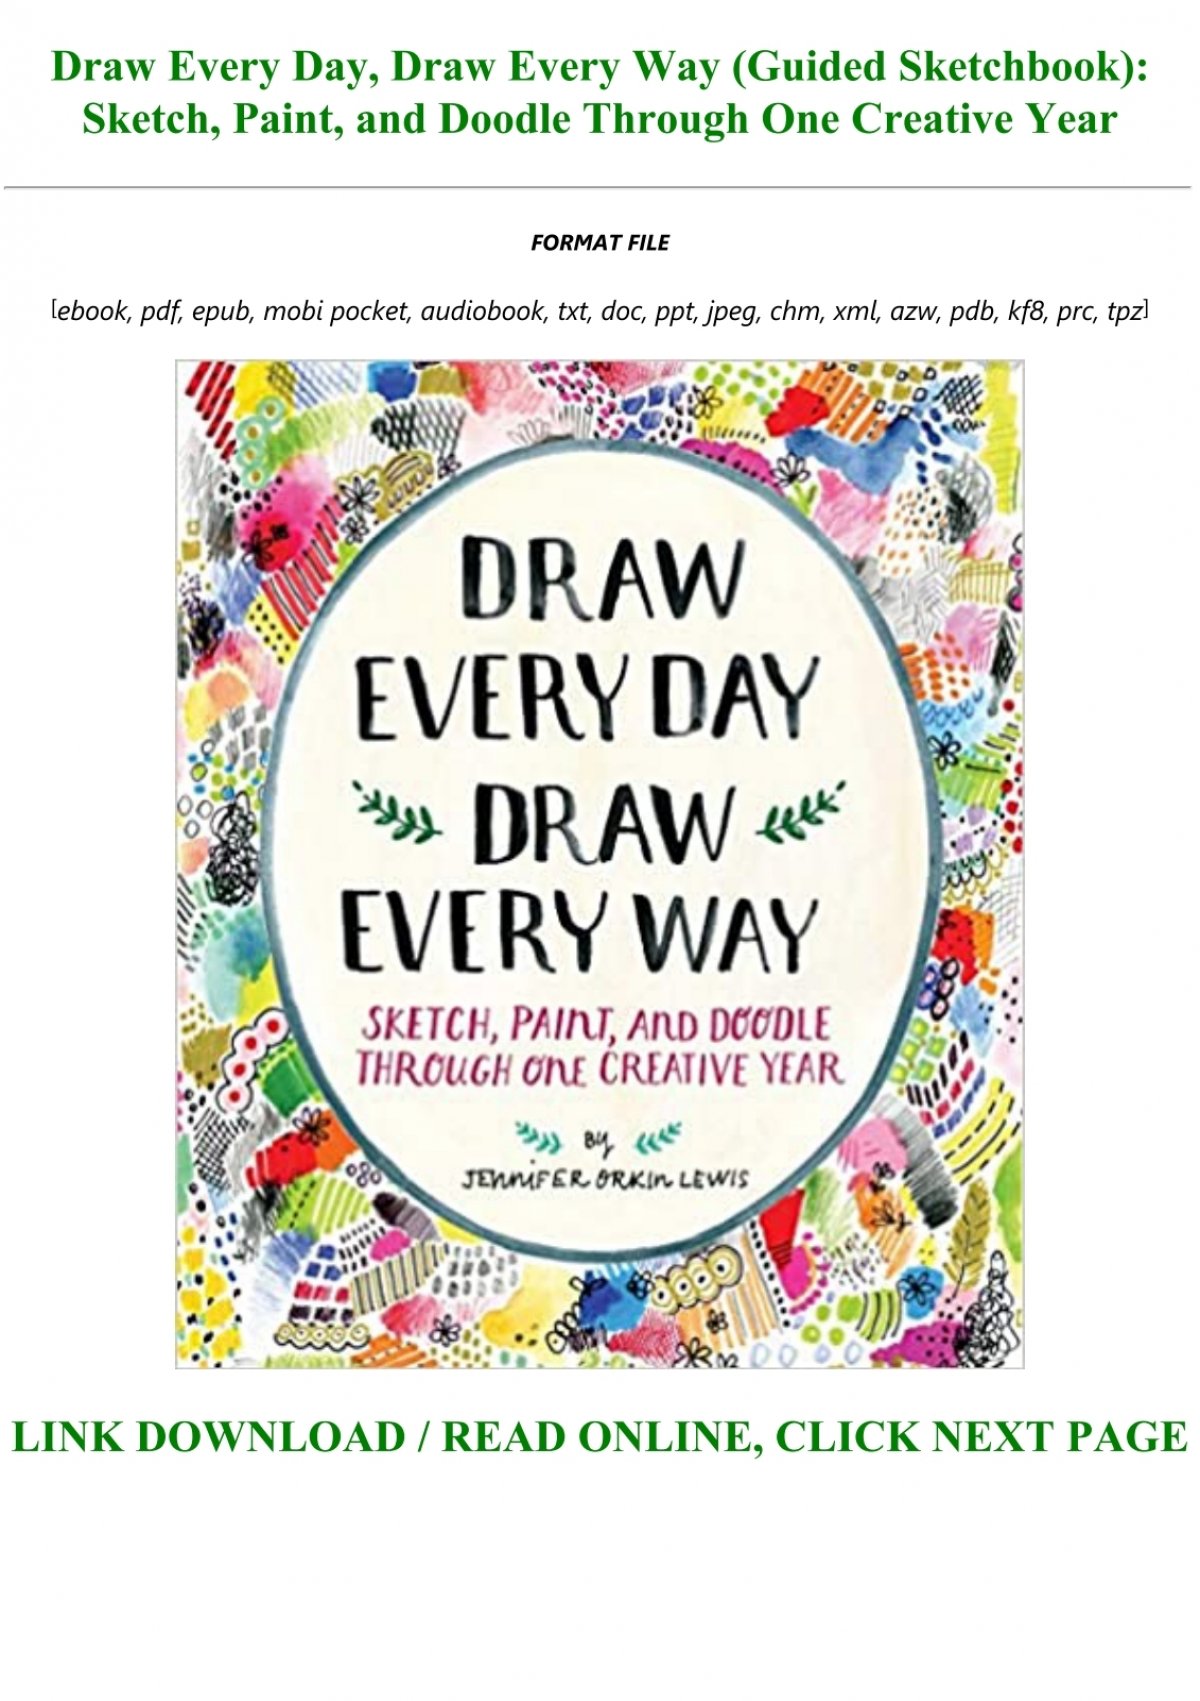 Draw Every Day, Draw Every Way (Guided Sketchbook) (Paperback